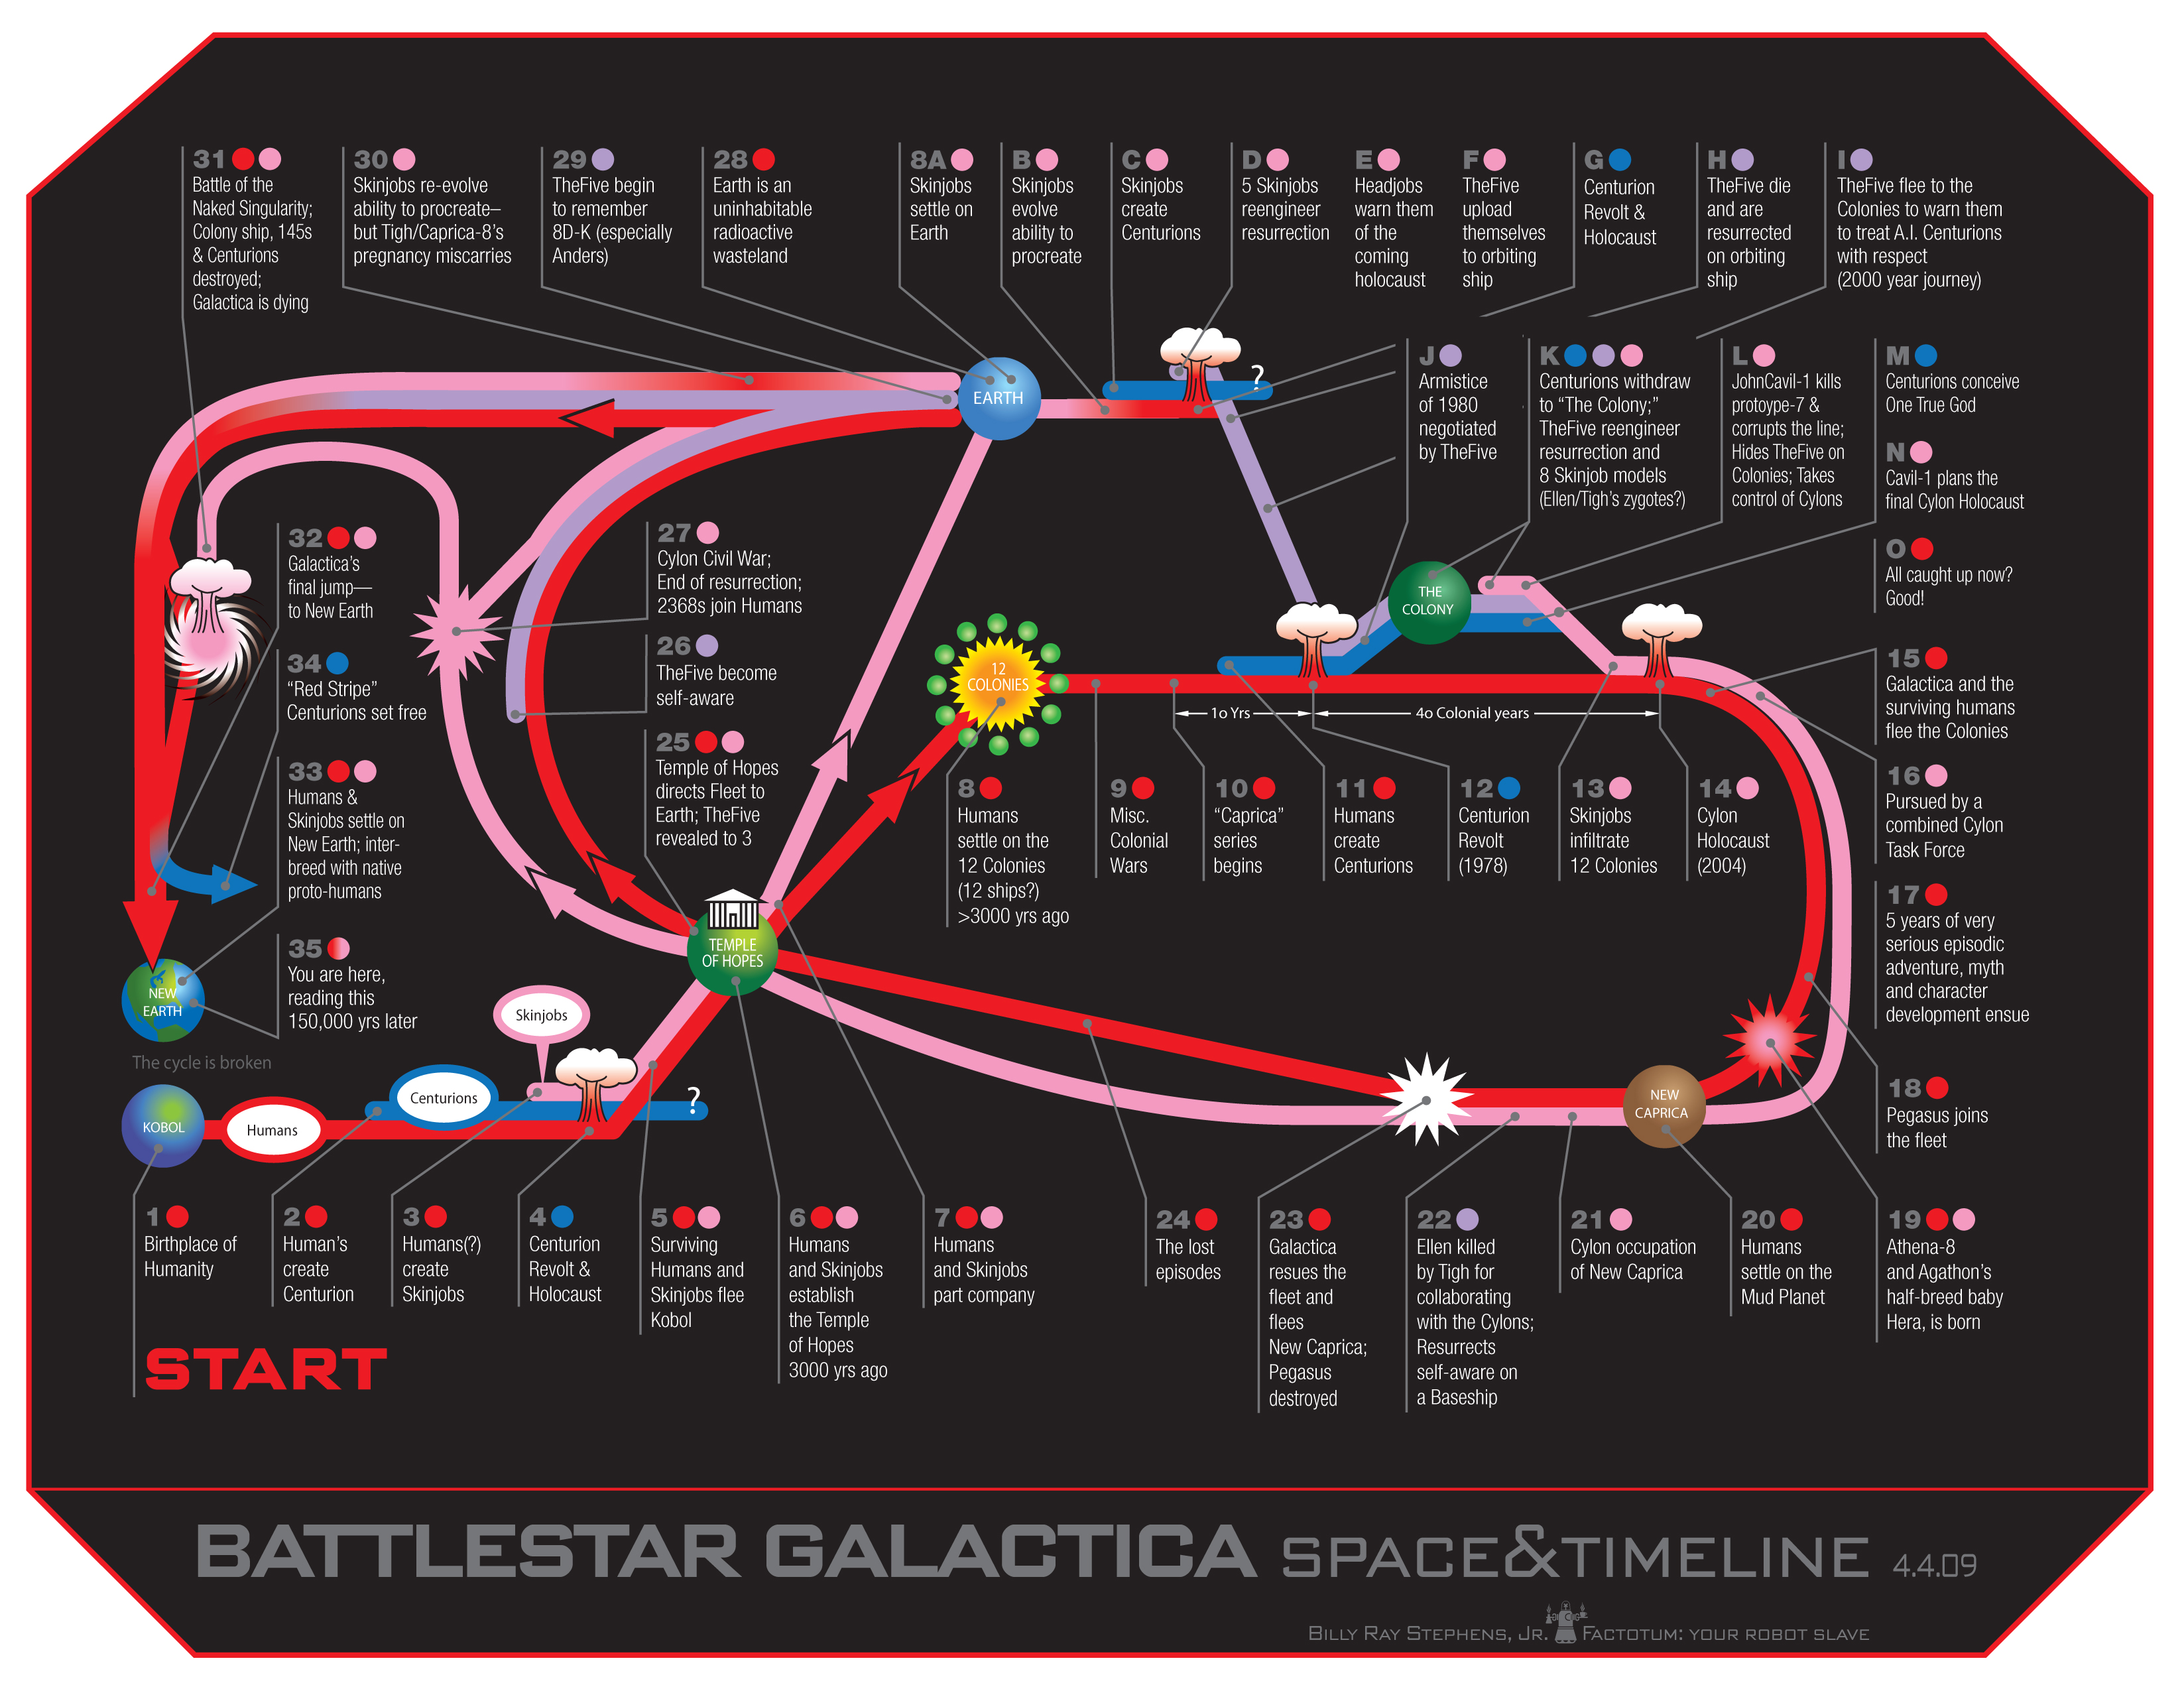 Free download Download free logos wallpaper Battlestar Galactica with size  640x960 [640x960] for your Desktop, Mobile & Tablet | Explore 50+ Battlestar  Galactica Wallpapers and Screensavers | Battlestar Galactica Wallpapers, Galactica  Wallpaper,